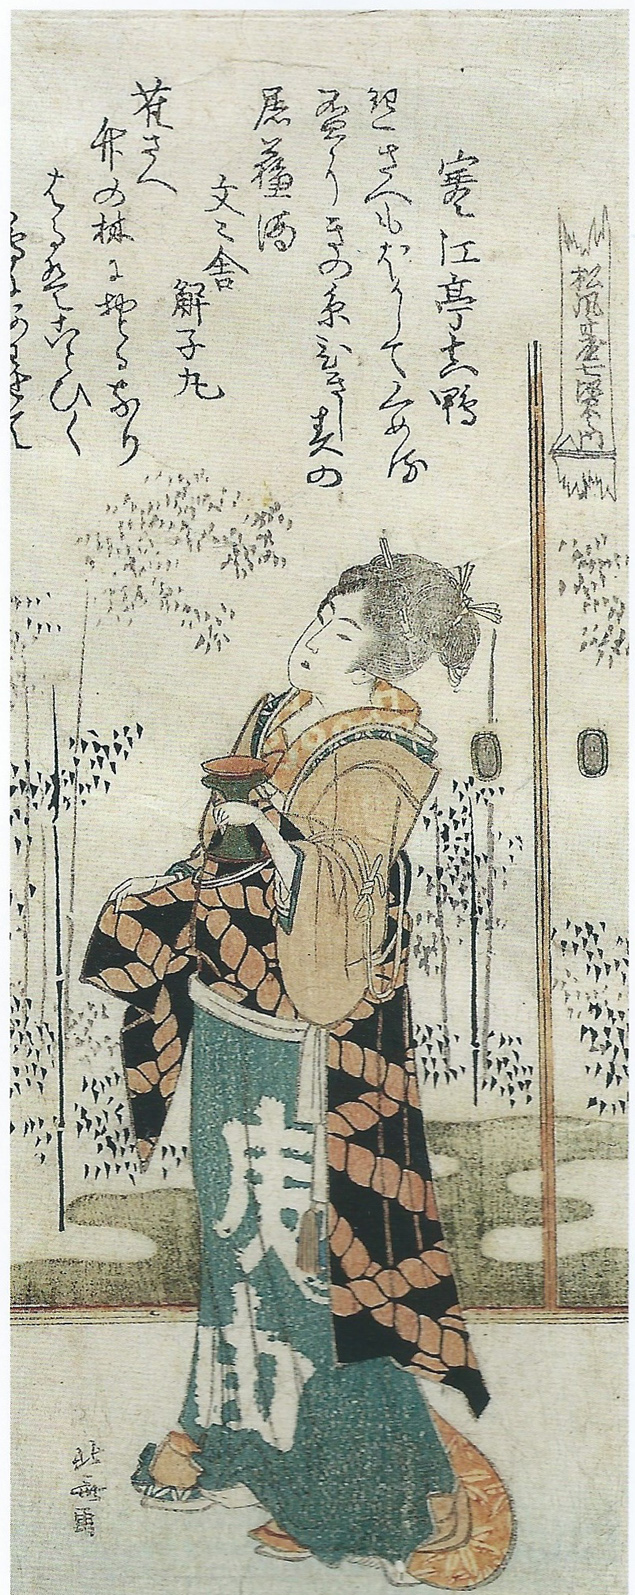 Hokusai - A beauty Holding a Cup of Sake - 7 Sages for the Shofudai